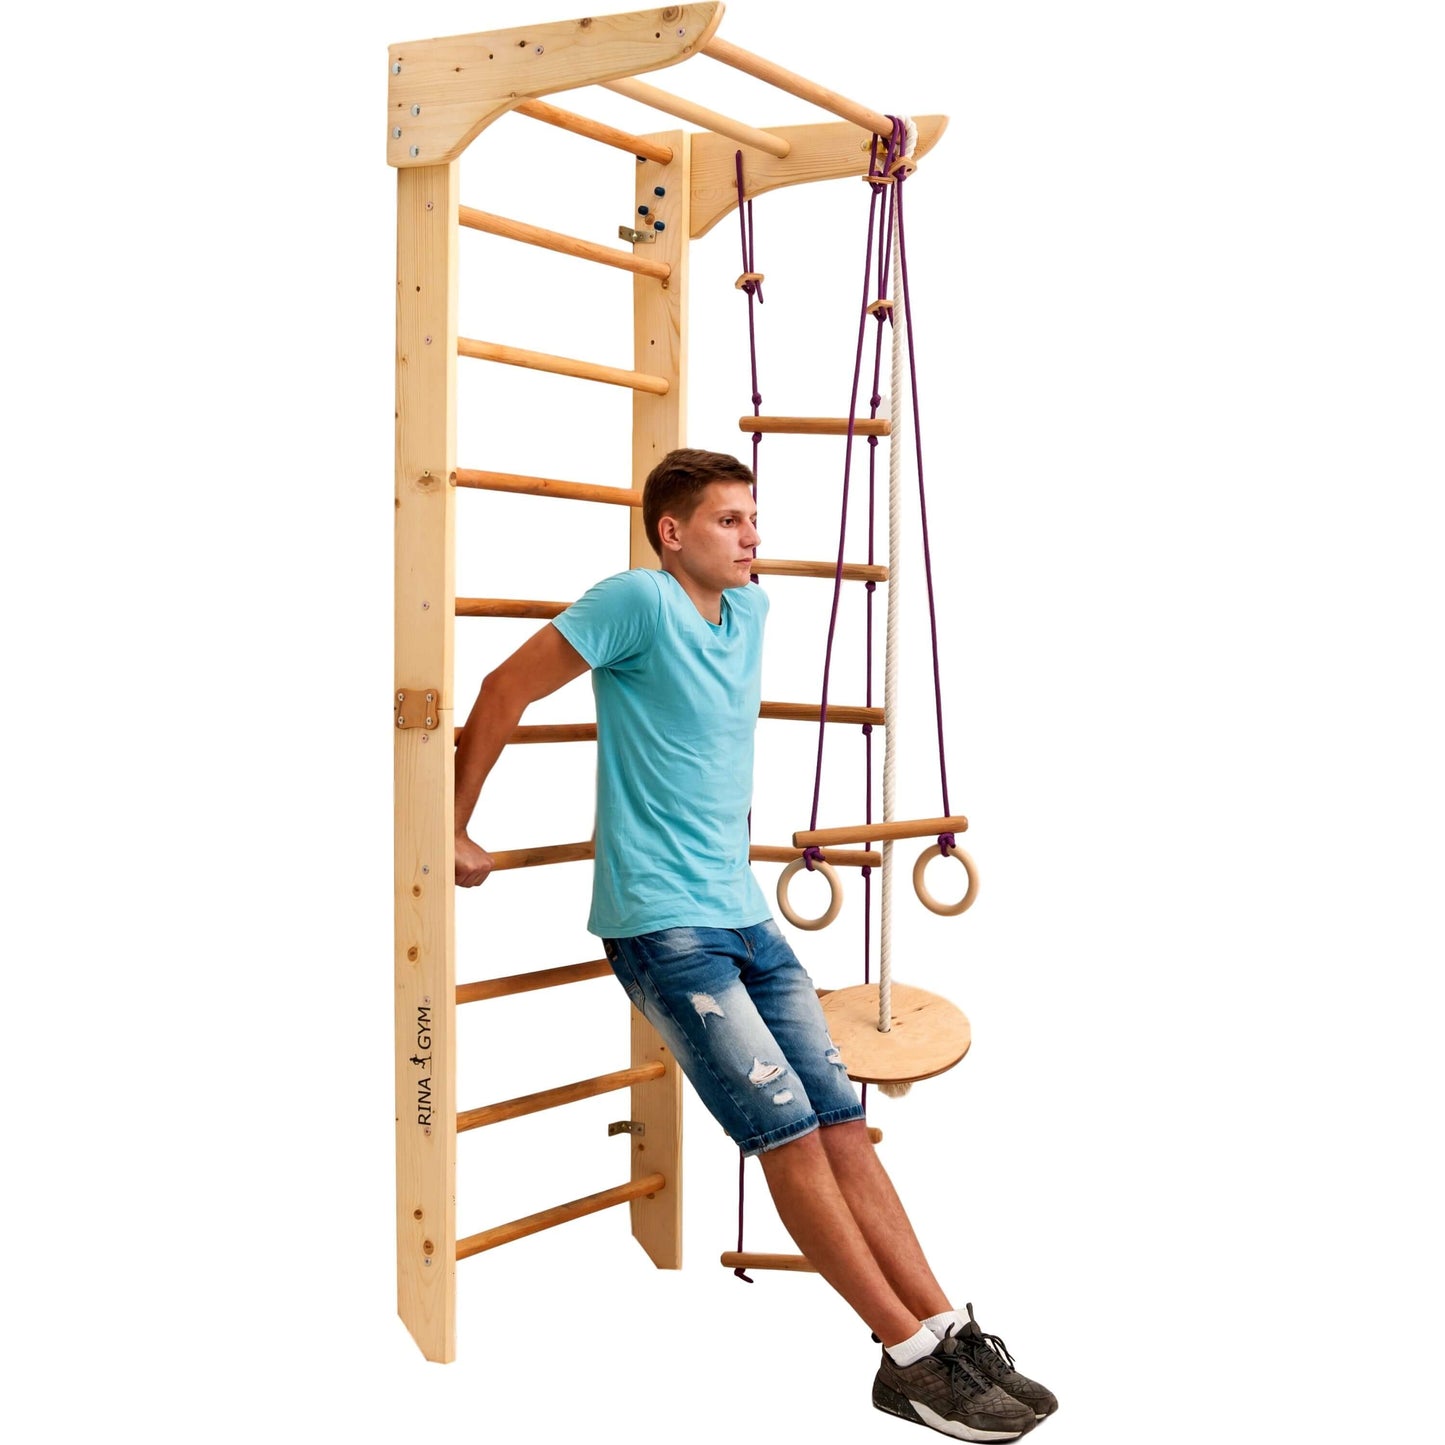 Climbing wall INA for children, various colors